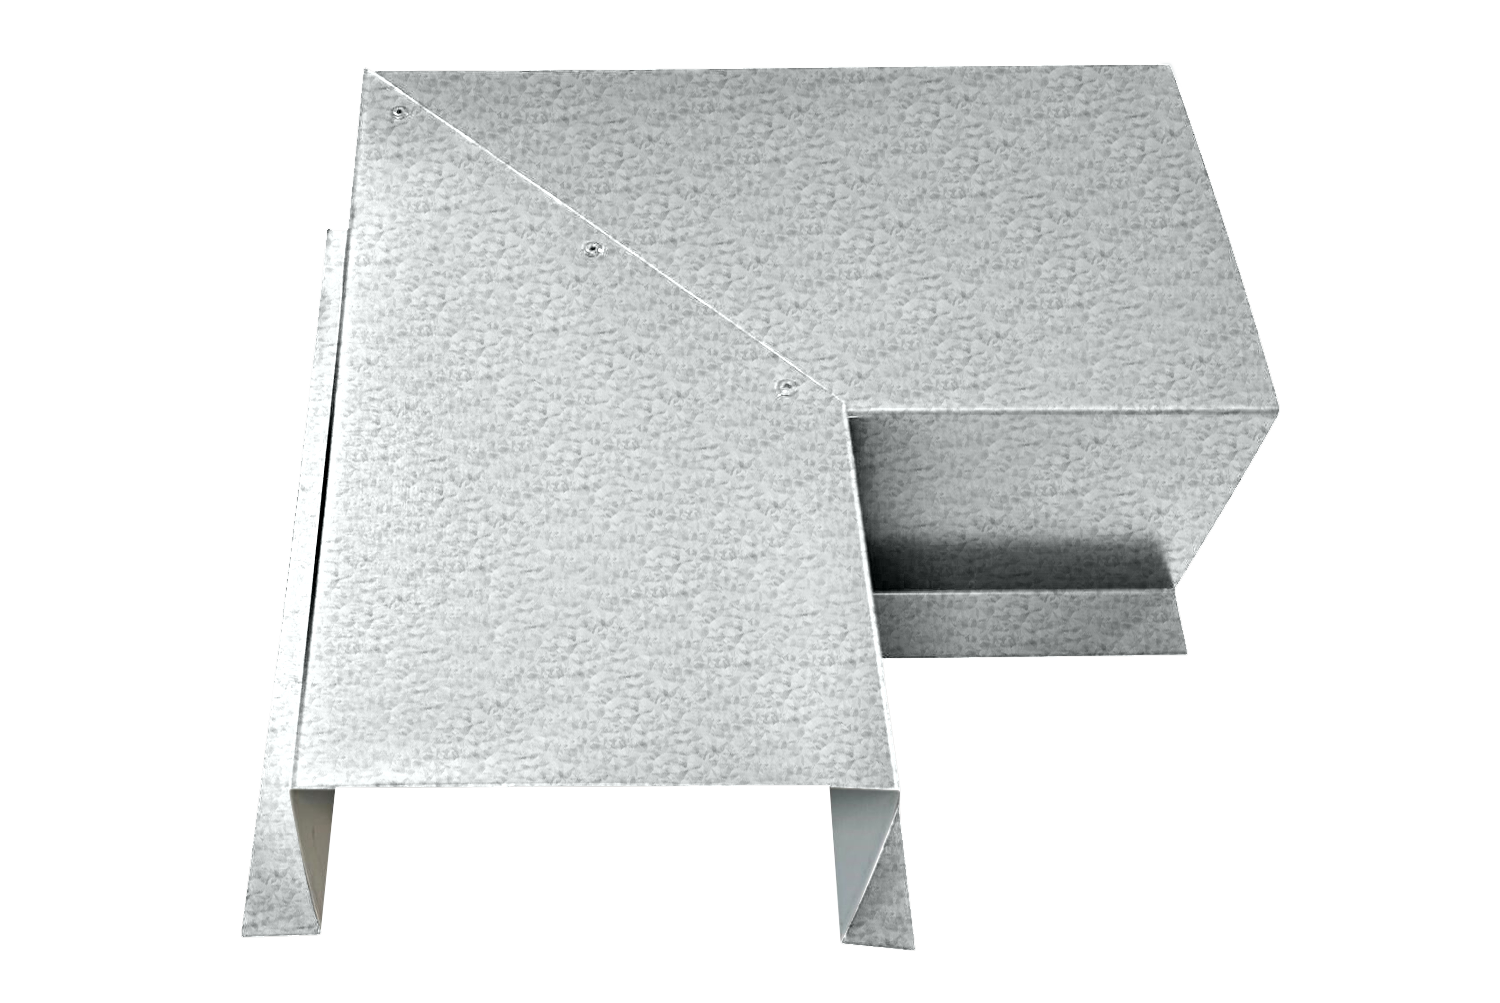 A textured, silver metal duct fitting with a rectangular shape and an angled section extending from the left side. Made from premium quality 24-gauge steel, it has a grainy, galvanized finish and appears designed for HVAC or industrial ventilation systems. The product is the Perma Cover Commercial Series - 24 Gauge Line Set Cover Side Turning Elbows - Premium Quality.